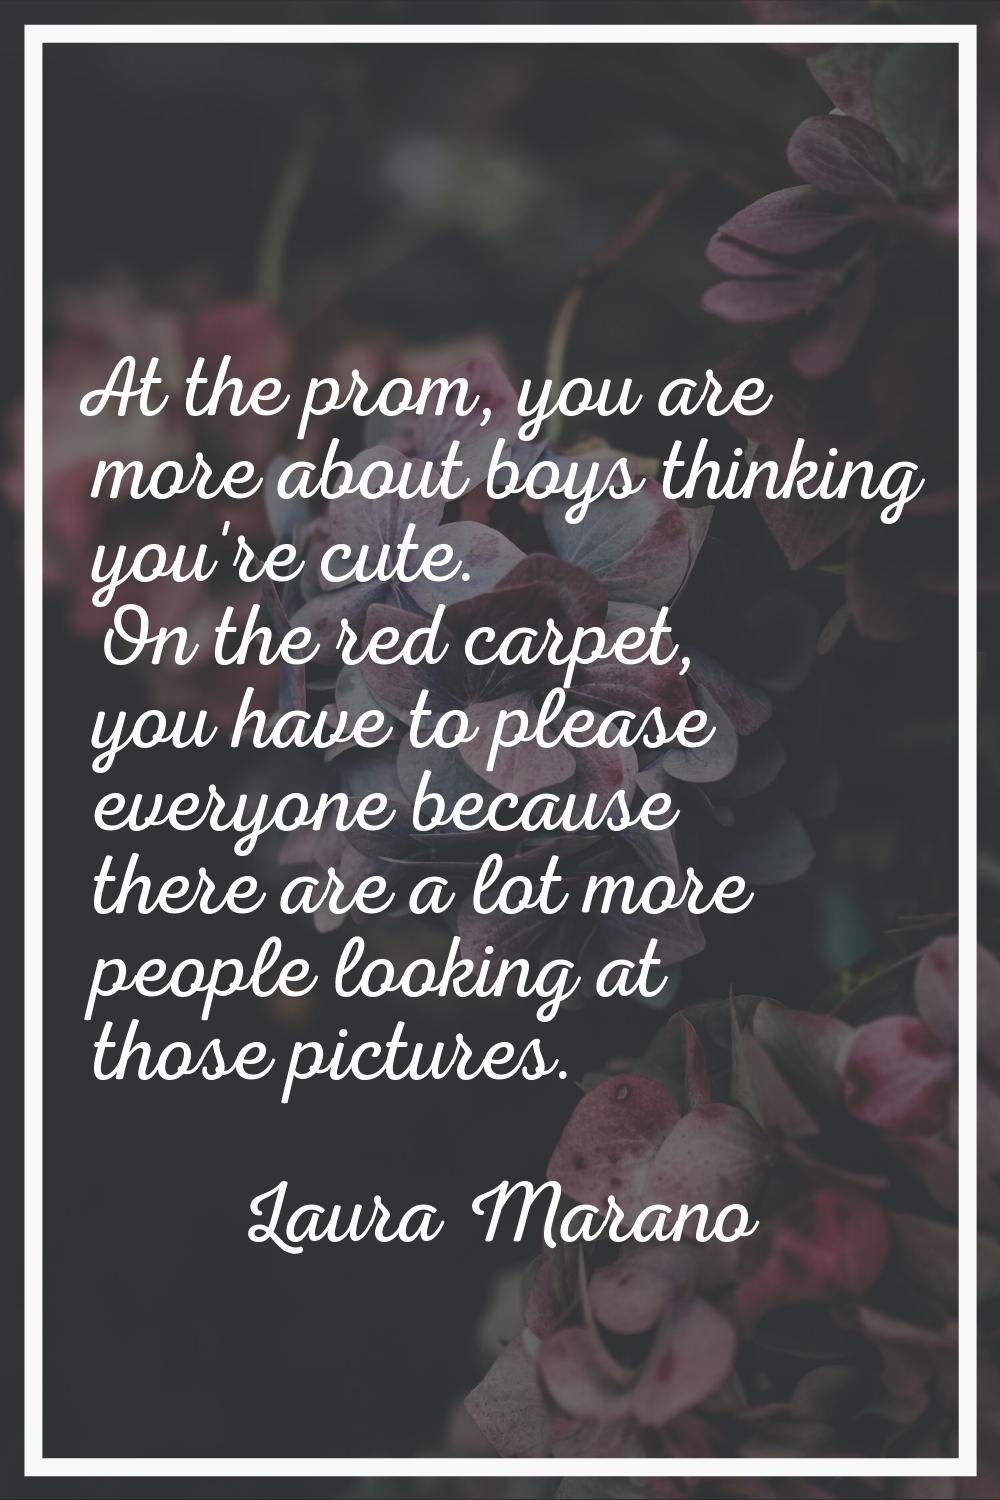 At the prom, you are more about boys thinking you're cute. On the red carpet, you have to please ev